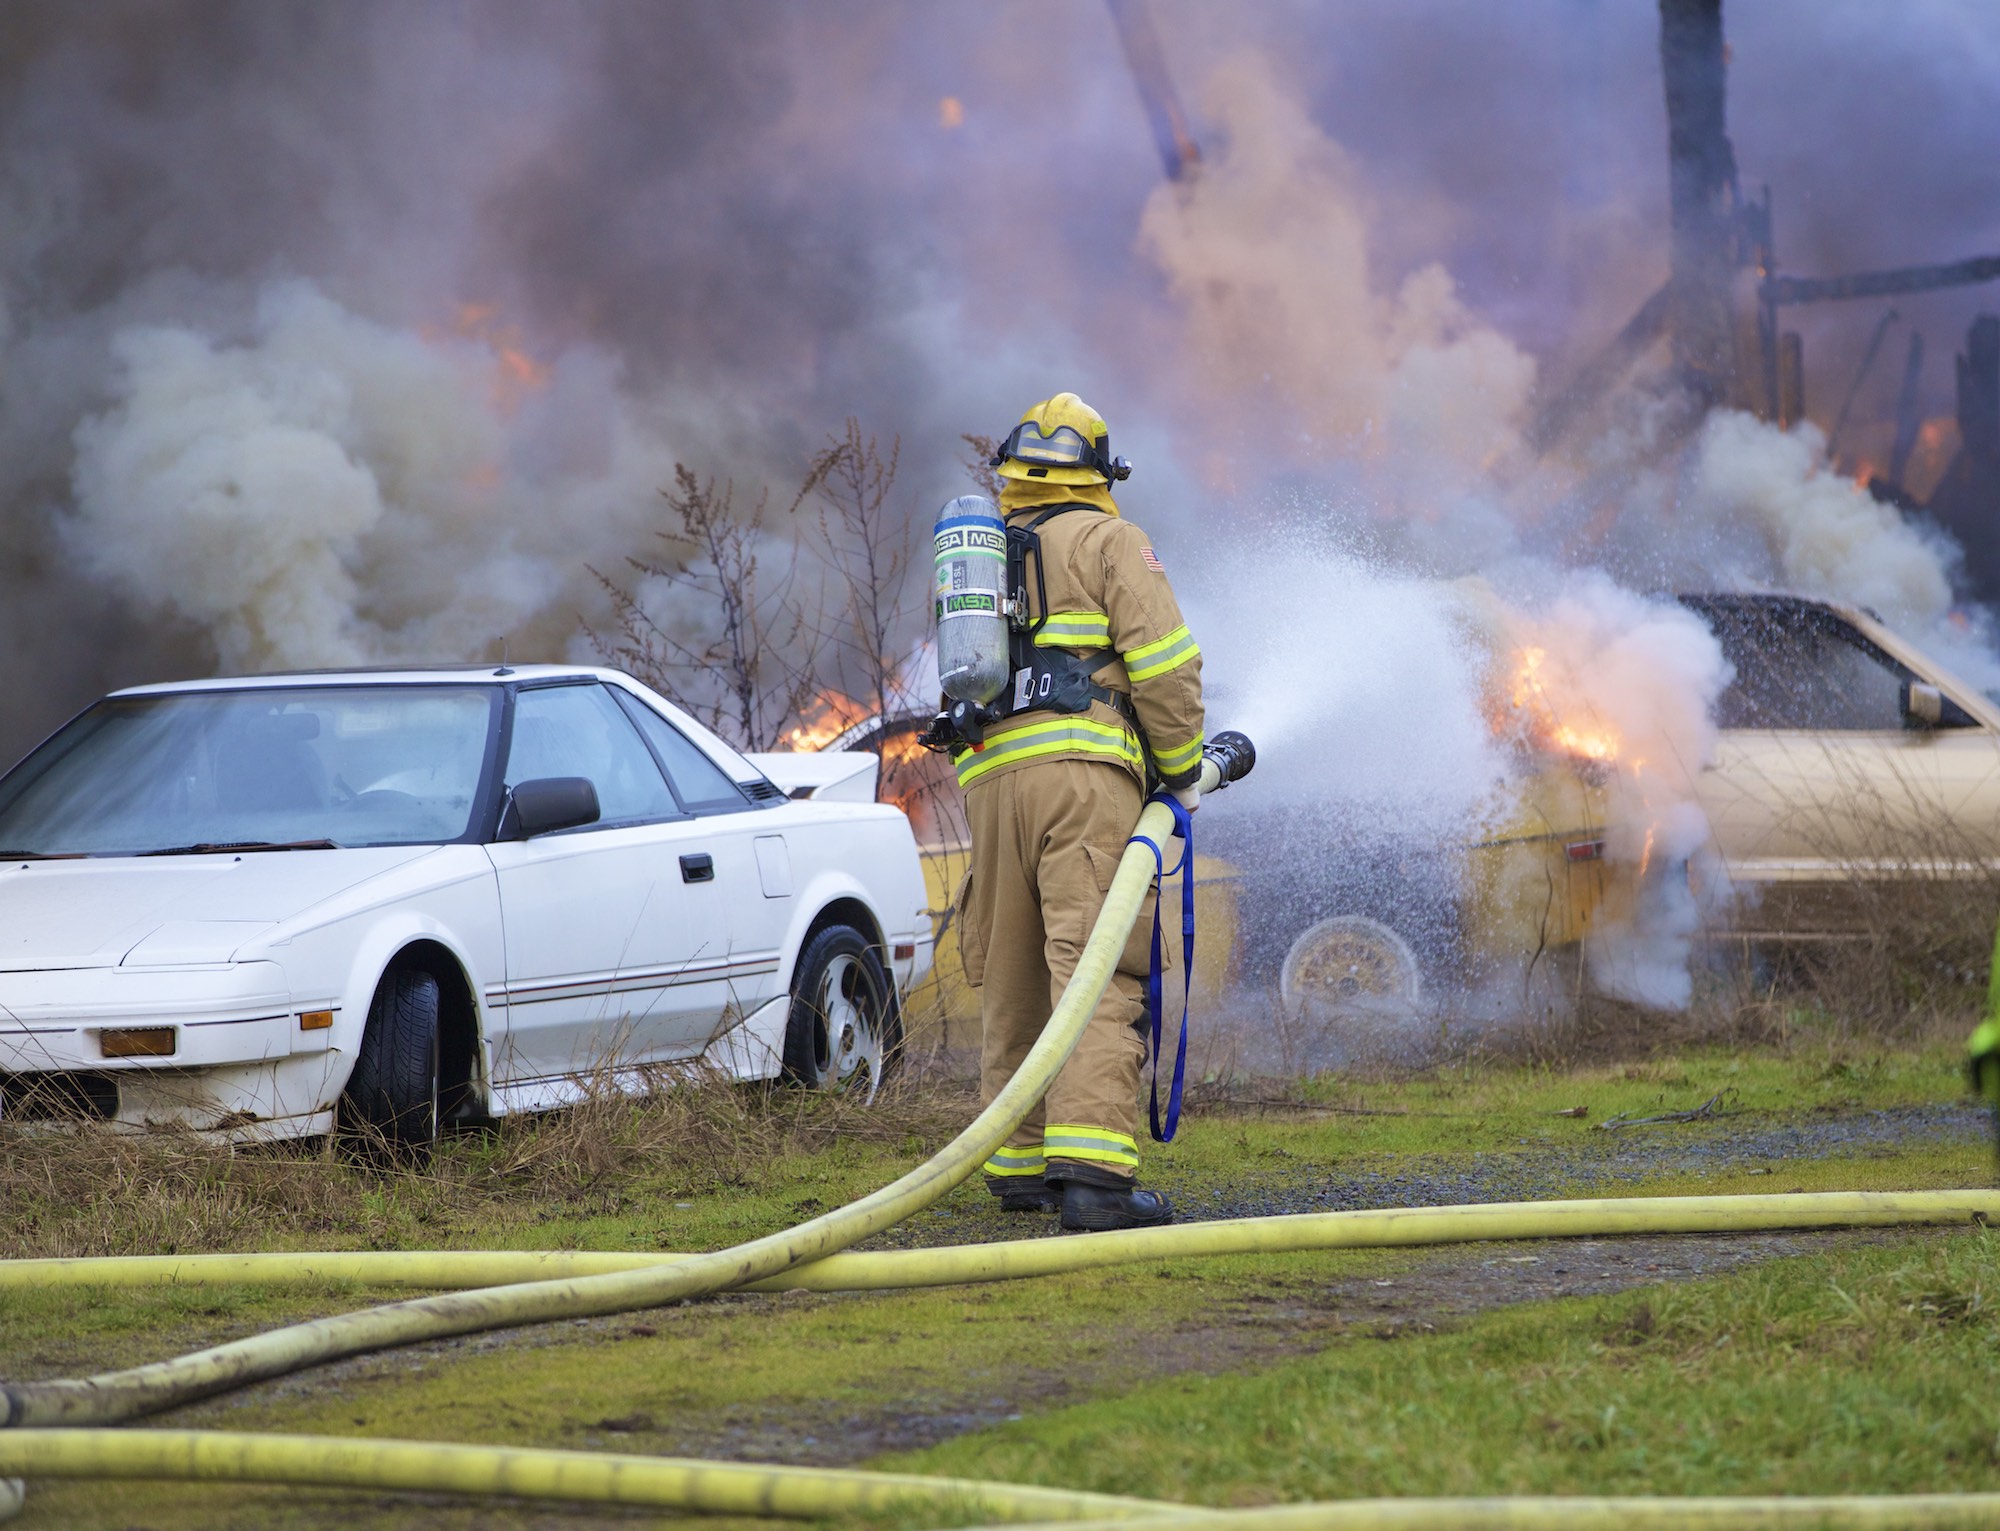 A firefighter from Station 91 on Indian Island hoses down a burning car at a barn fire in Chimacum on Saturday afternoon. (Steve Mullensky/for Peninsula Daily News)